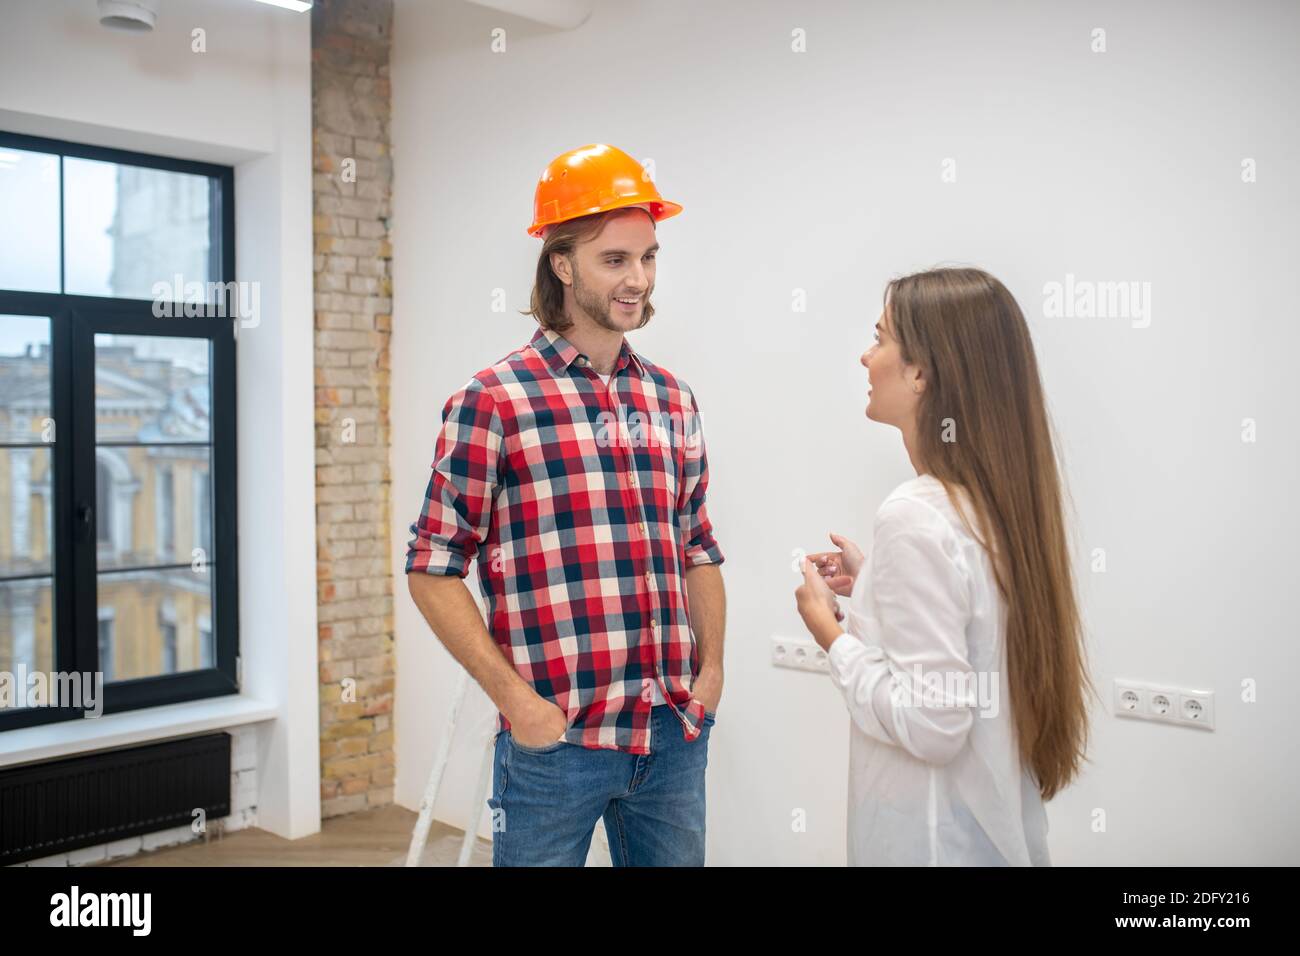 Female purchaser talking to the construction worker Stock Photo